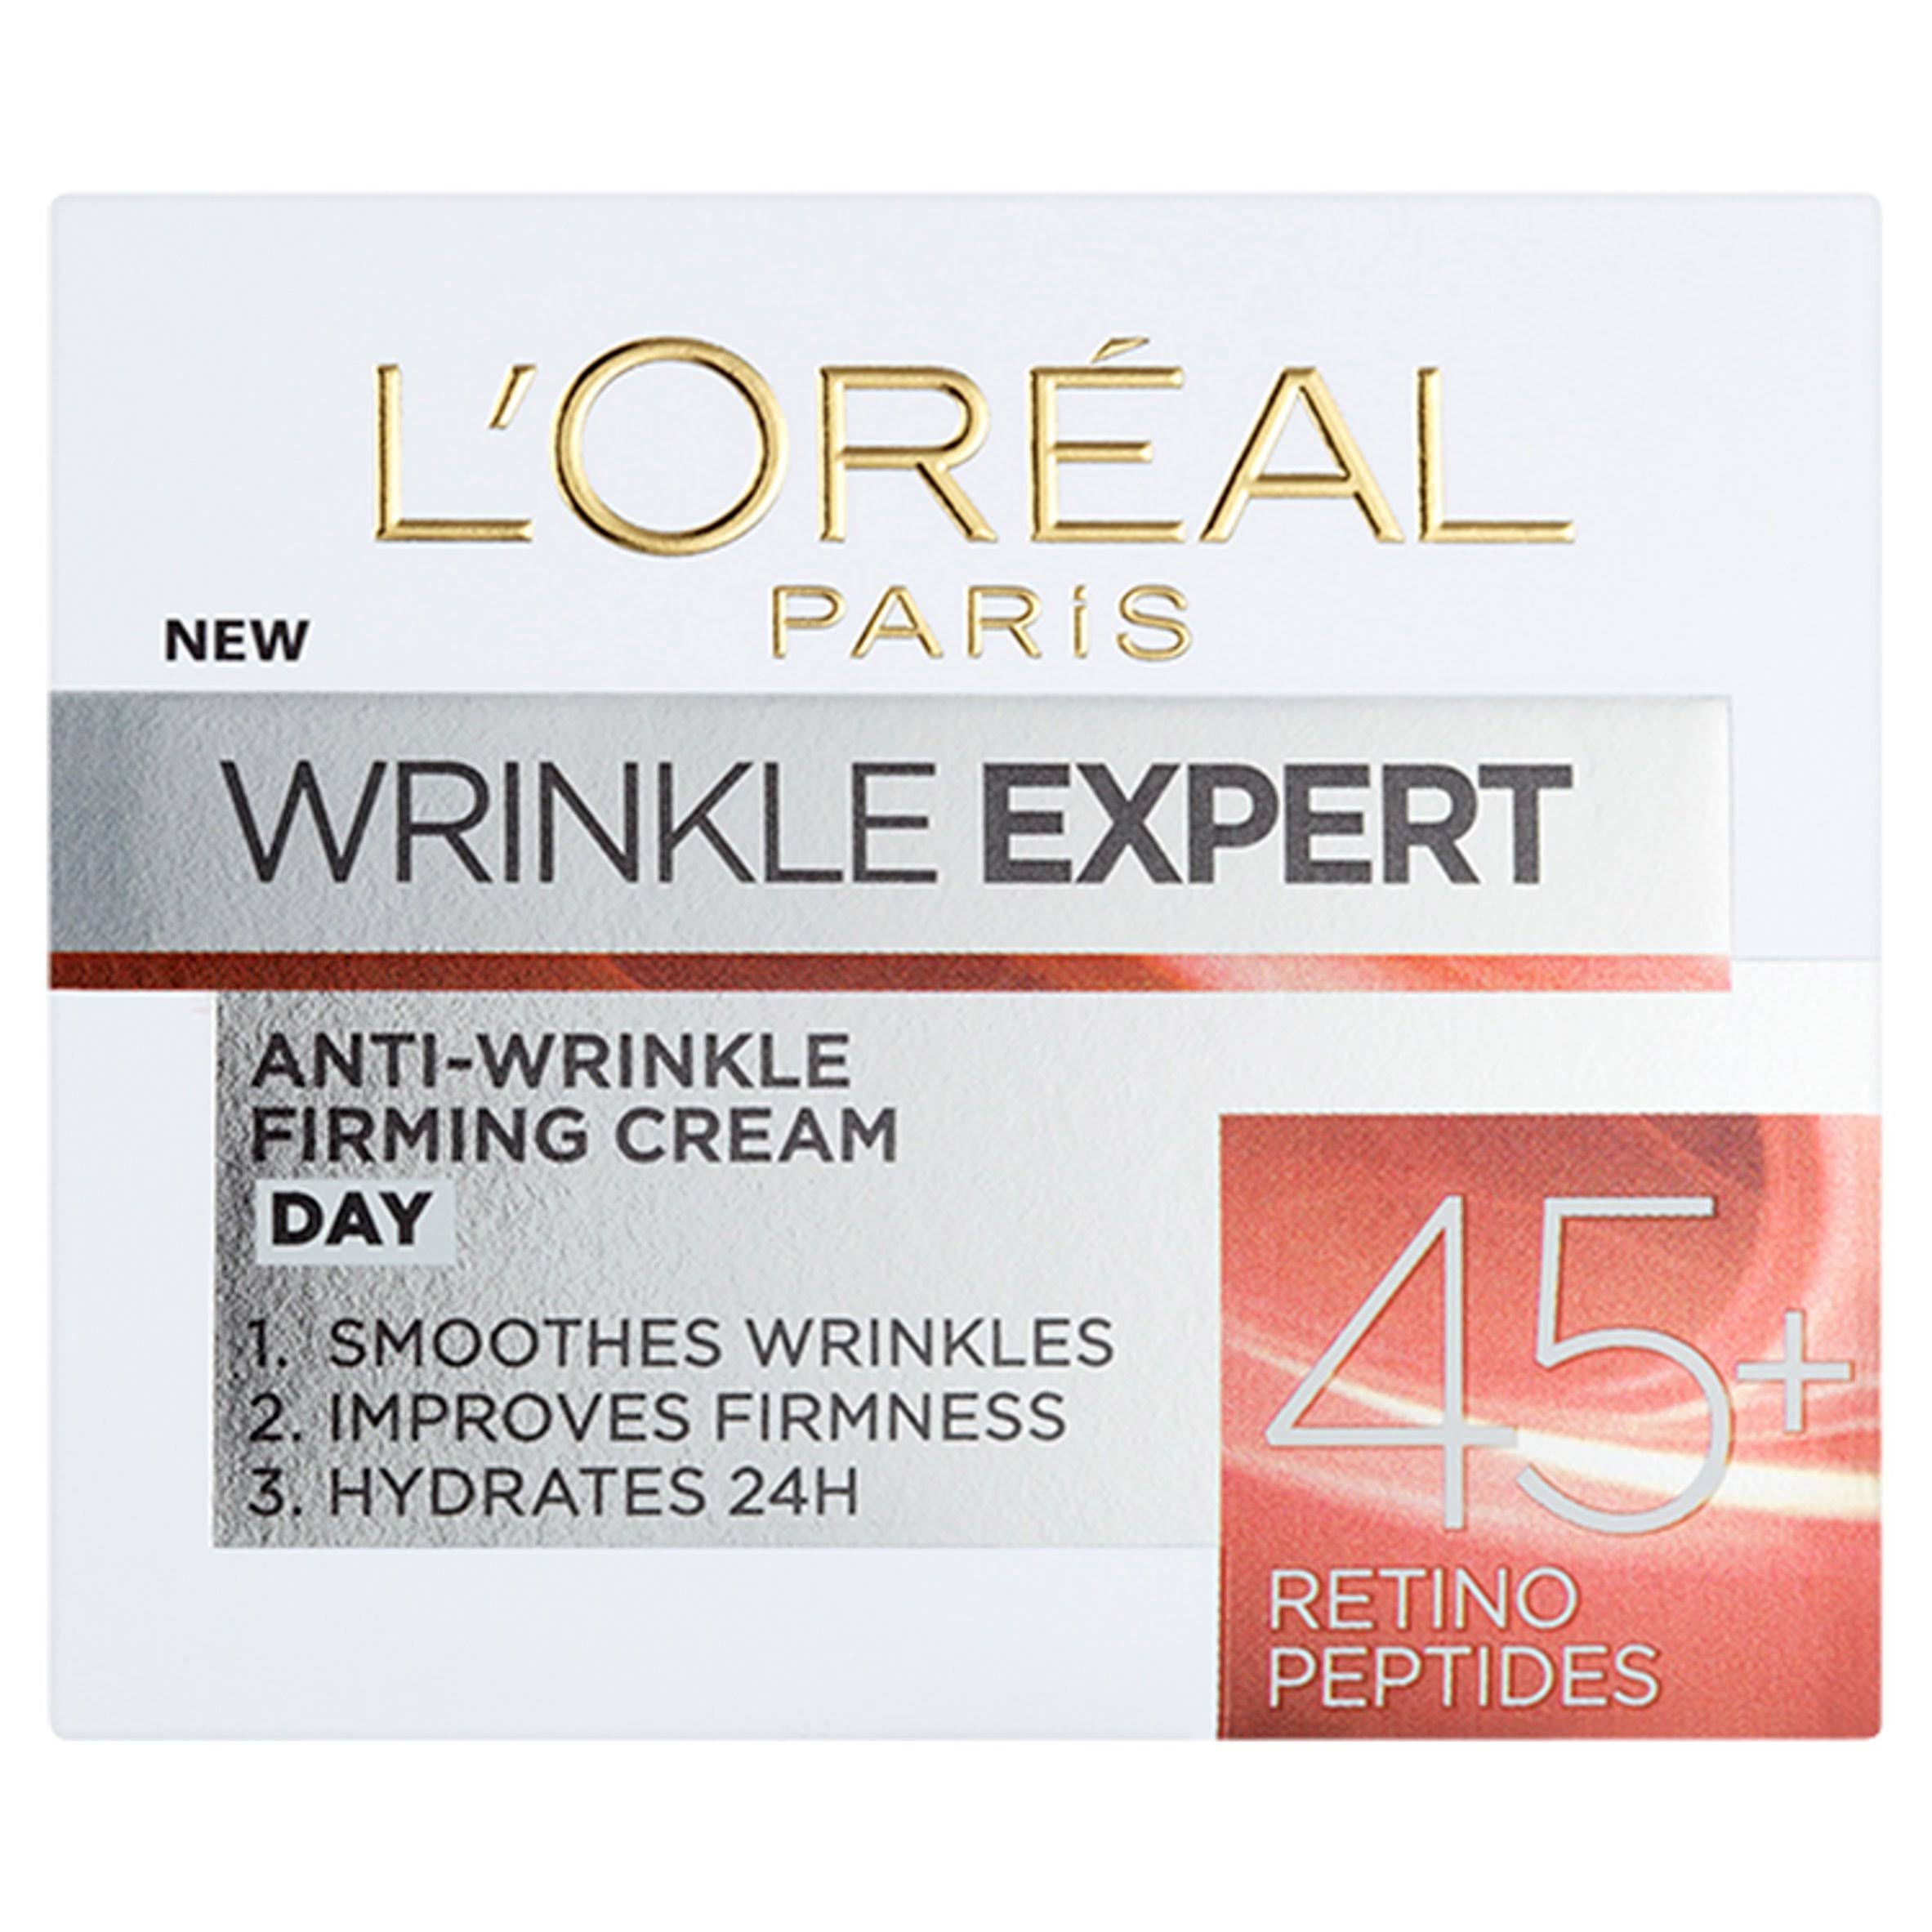 LOreal Wrinkle Expert Spf20 45+ by dpharmacy